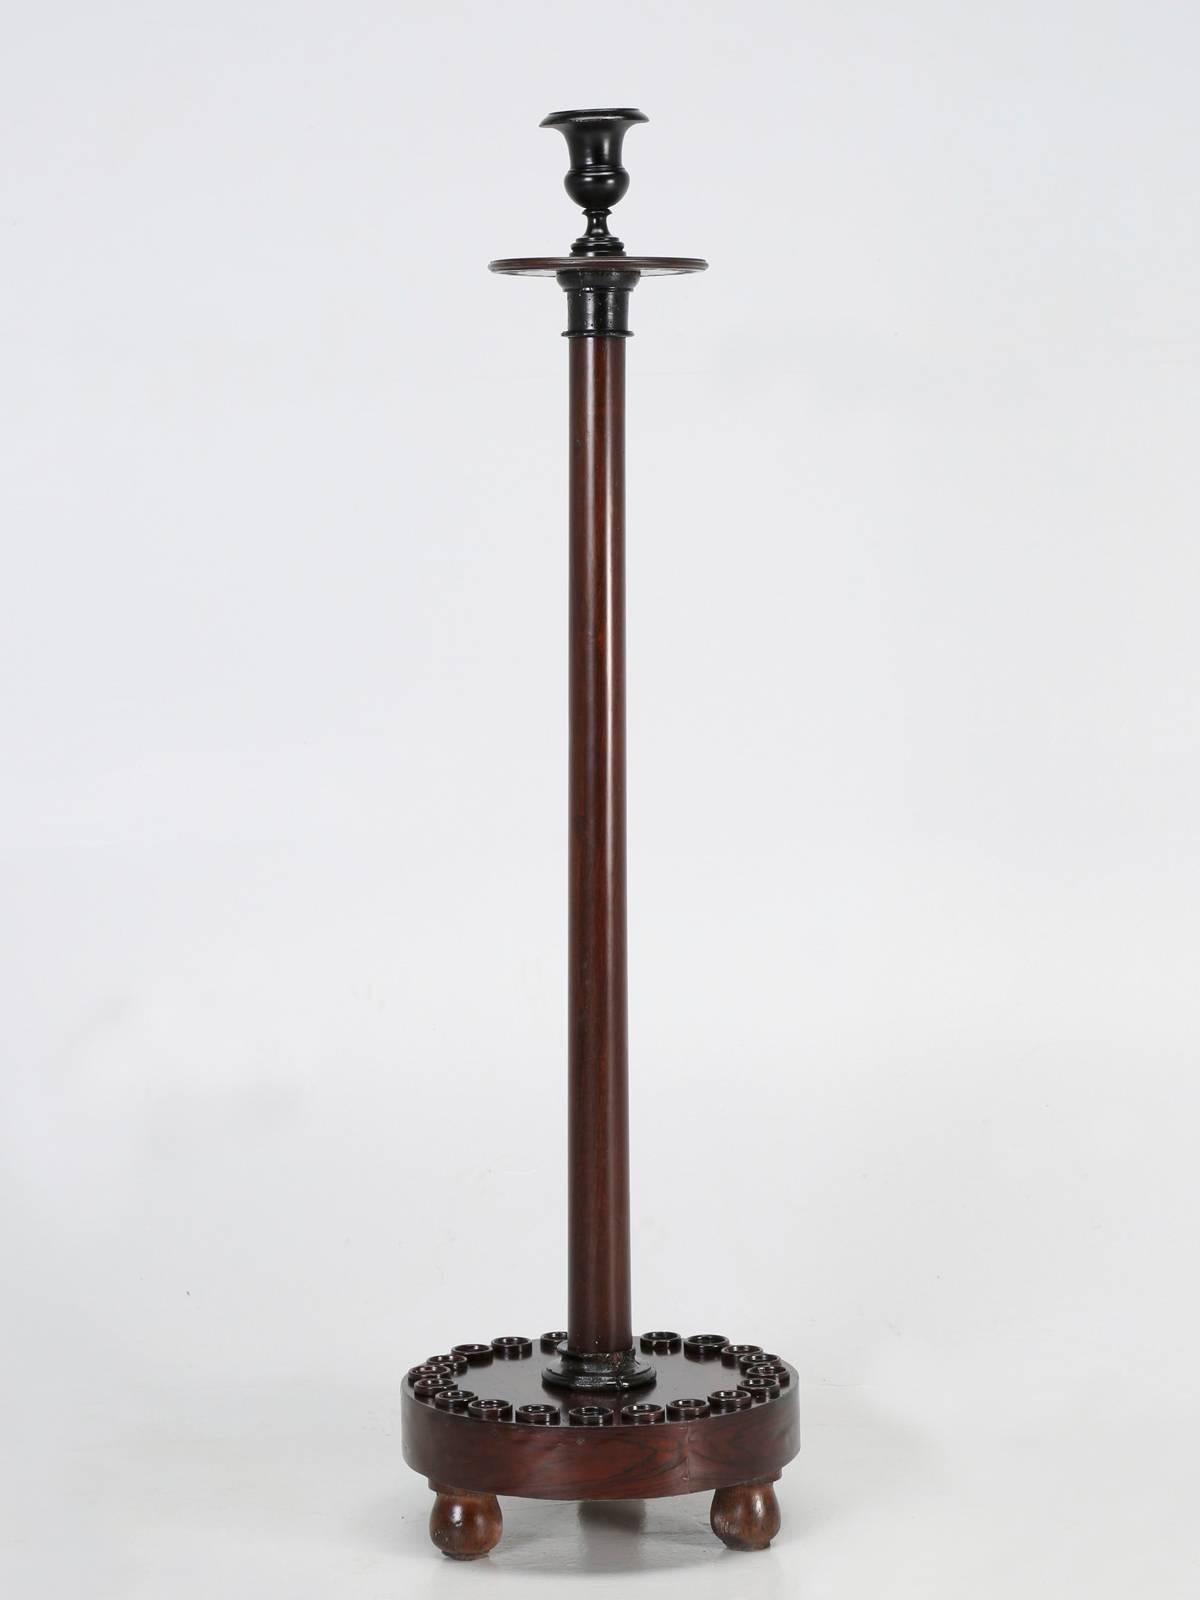 Antique French pool cue holder, from the late 1800s. We rarely are able to find such a high quality genuine antique pool cue holder, but this one appeared out of nowhere in France and unbelievably was made from rosewood. This has to be one of the